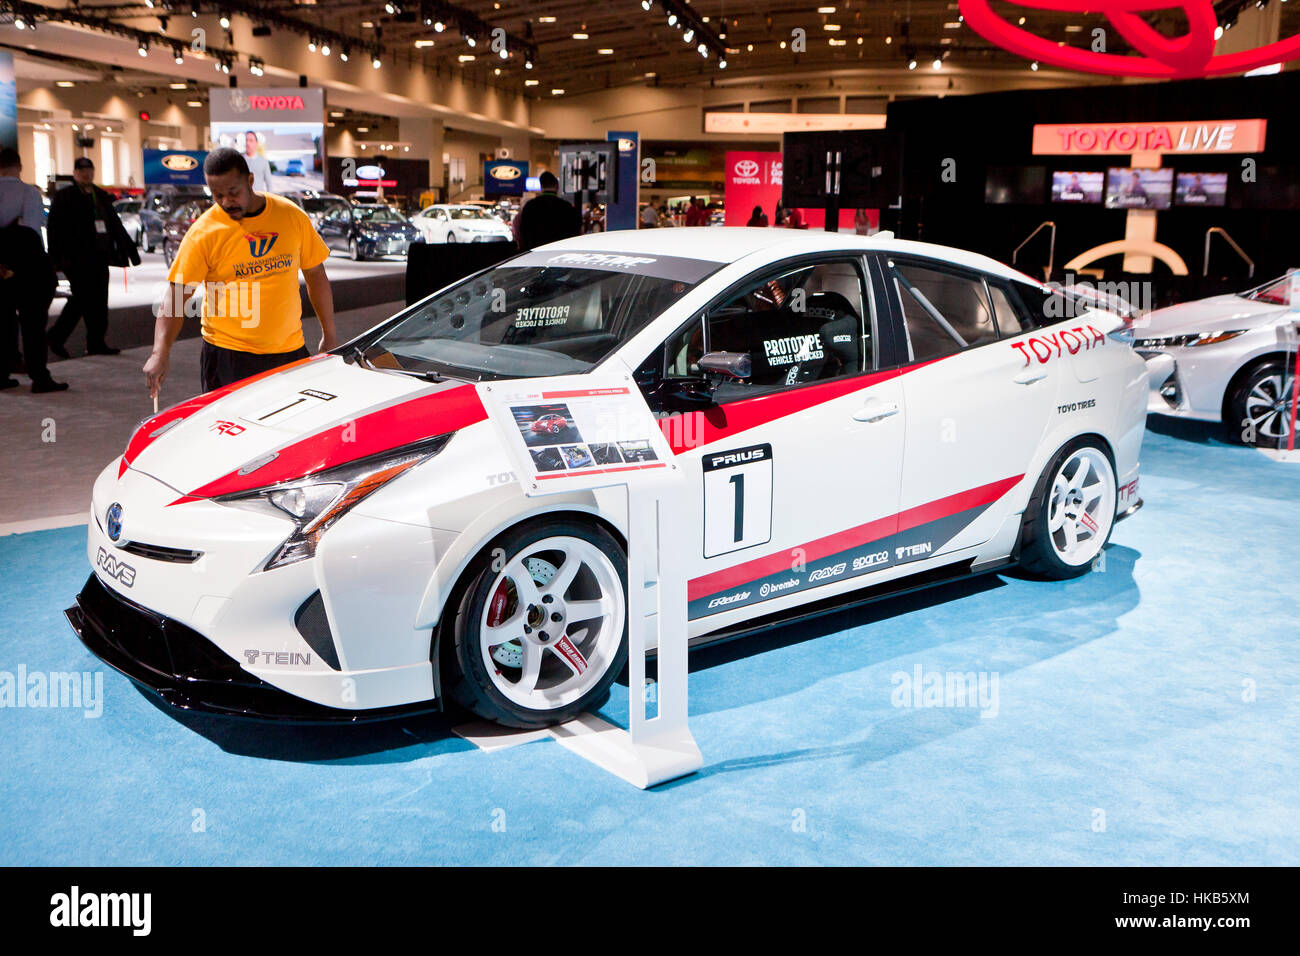 Washington, USA. 26th January, 2017. The annual Washington Auto Show brings many of the major auto makers to Washington, D.C., highlighting new safety features and models in electric vehicles and luxury/sport crossovers. Credit: B Christopher/Alamy Live News Stock Photo